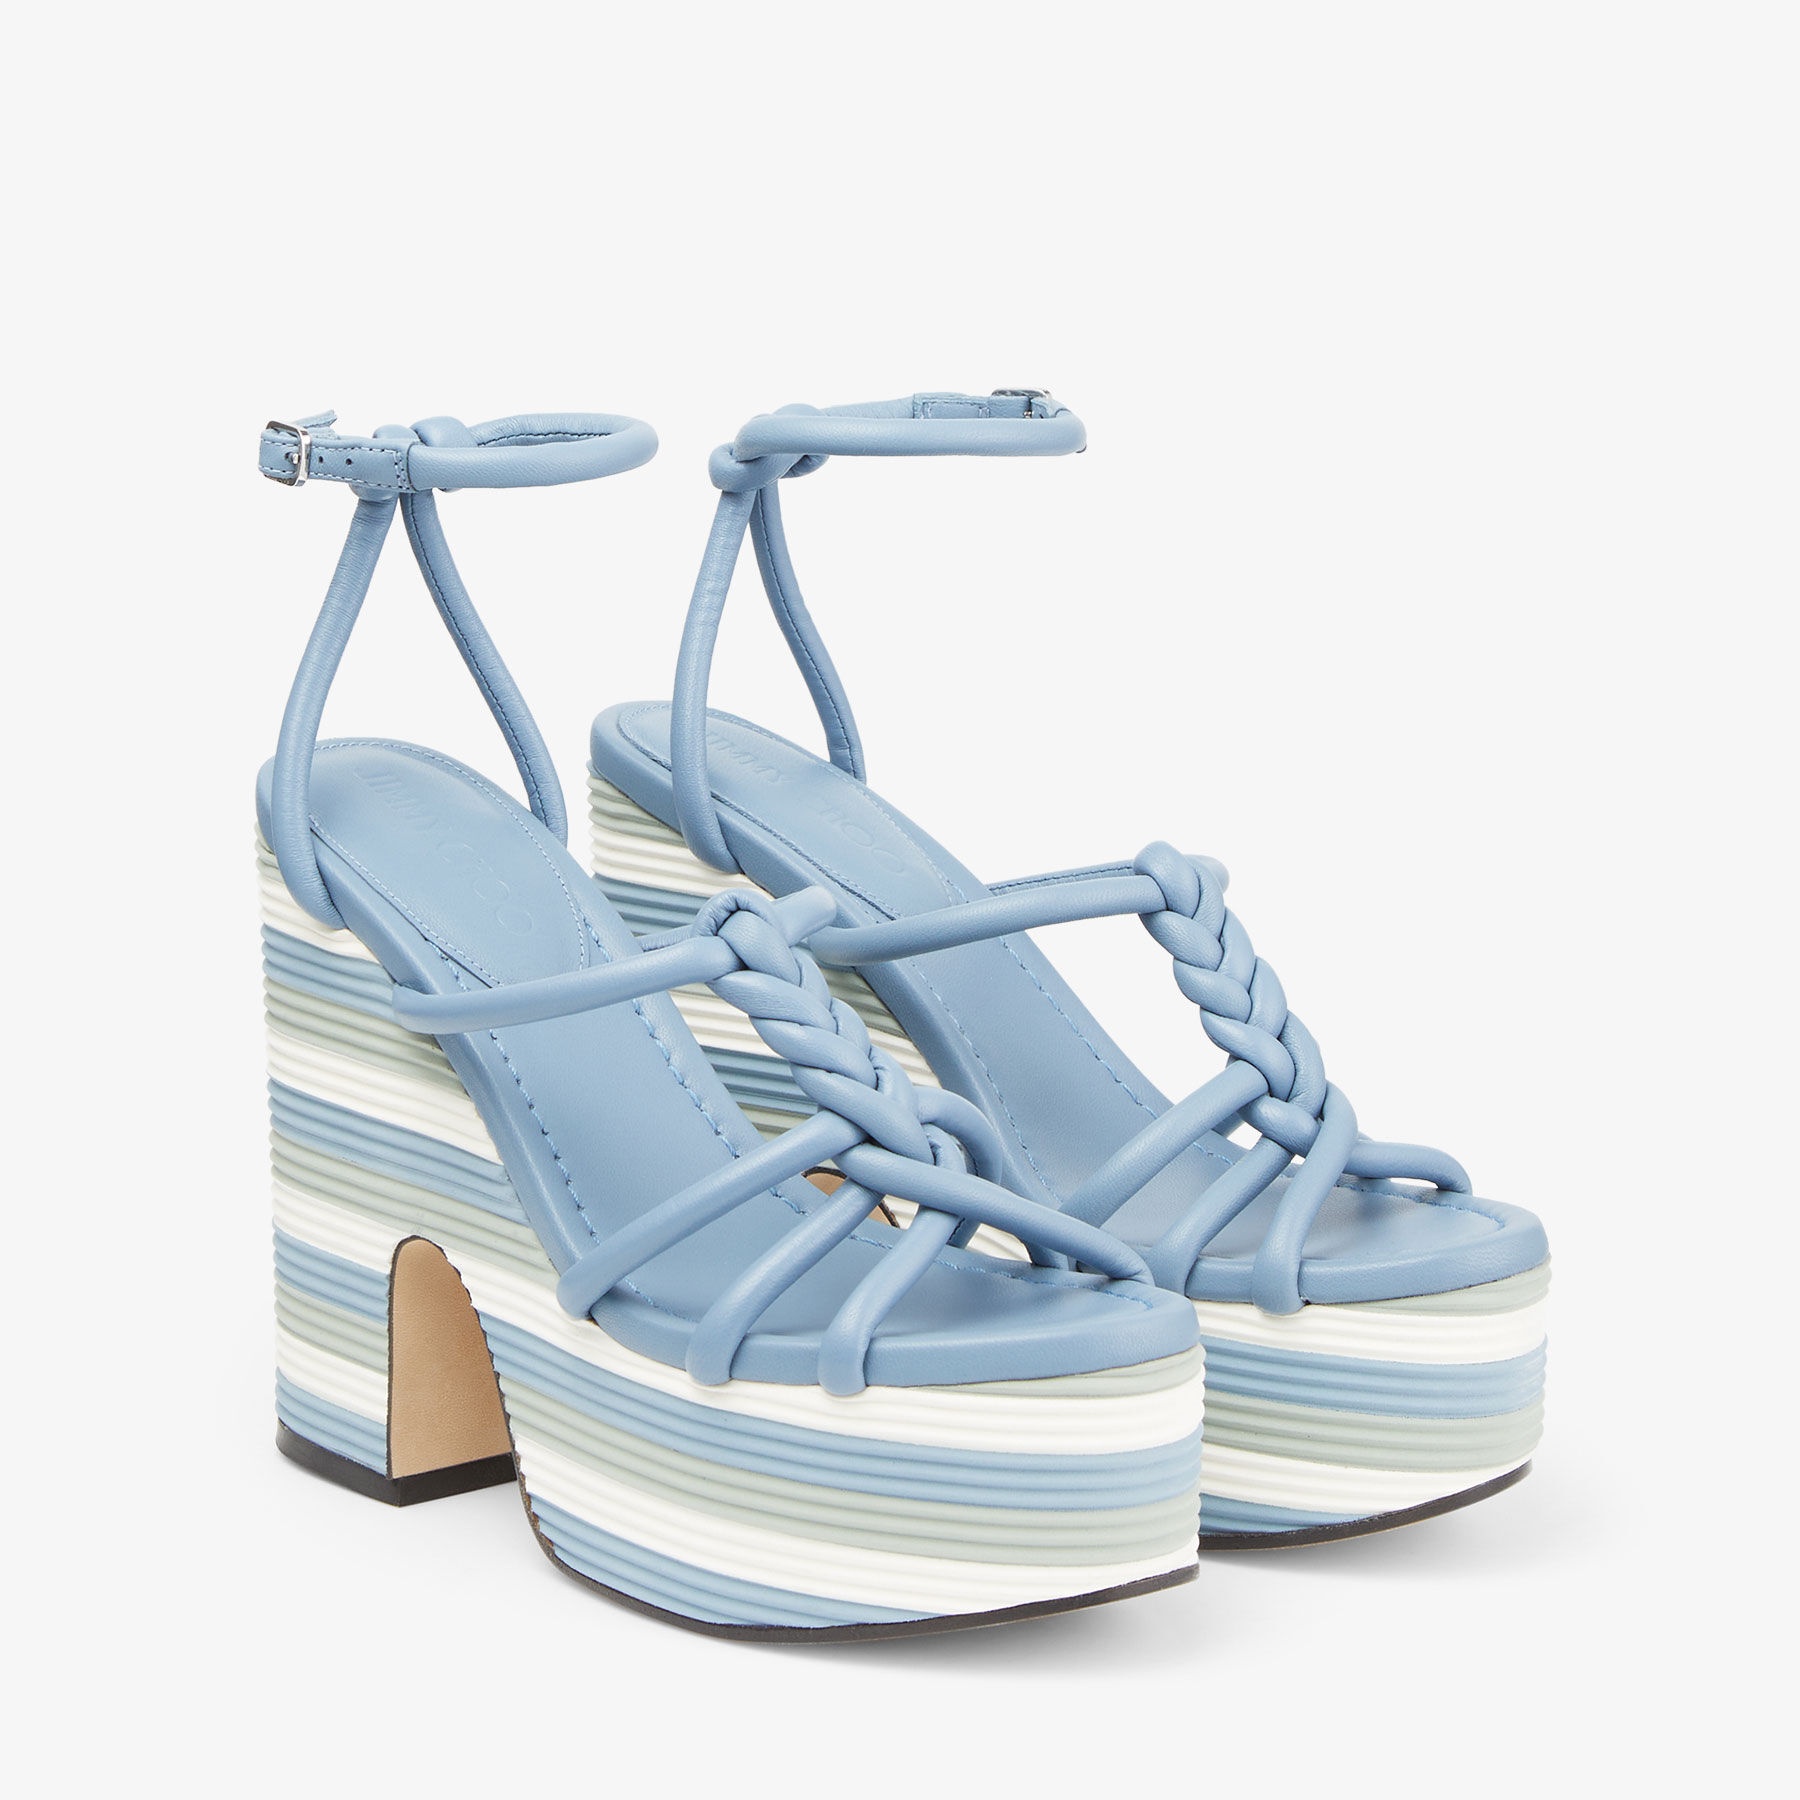 Clare Wedge 130
Smoky Blue Nappa Leather Wedge Sandals - 3